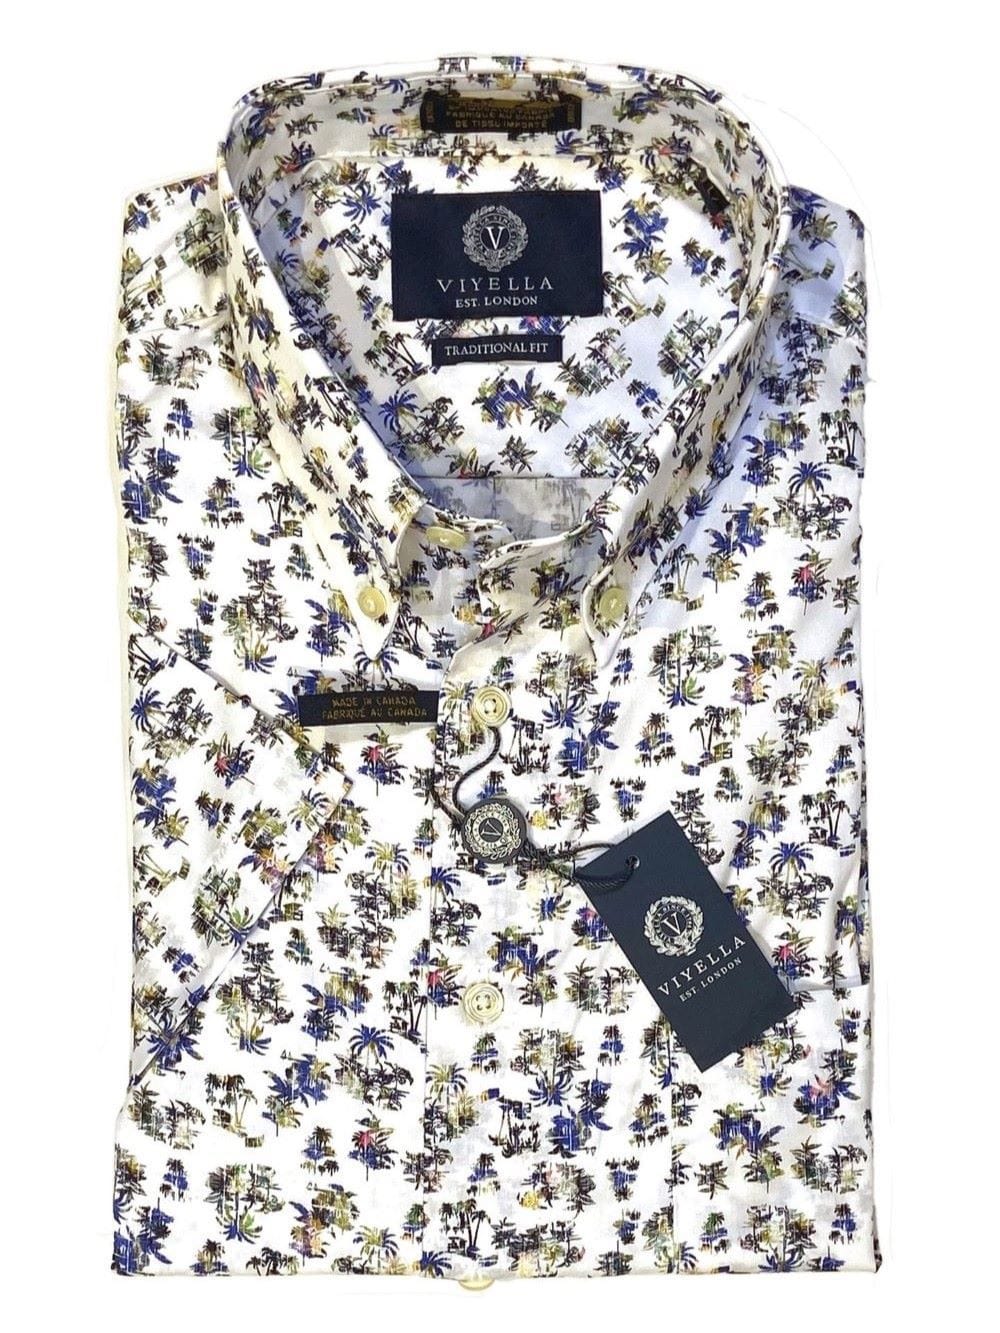 Viyella Discover Timeless Style with These Men's Print Cotton Short Sleeve Shirts - Made in Canada!